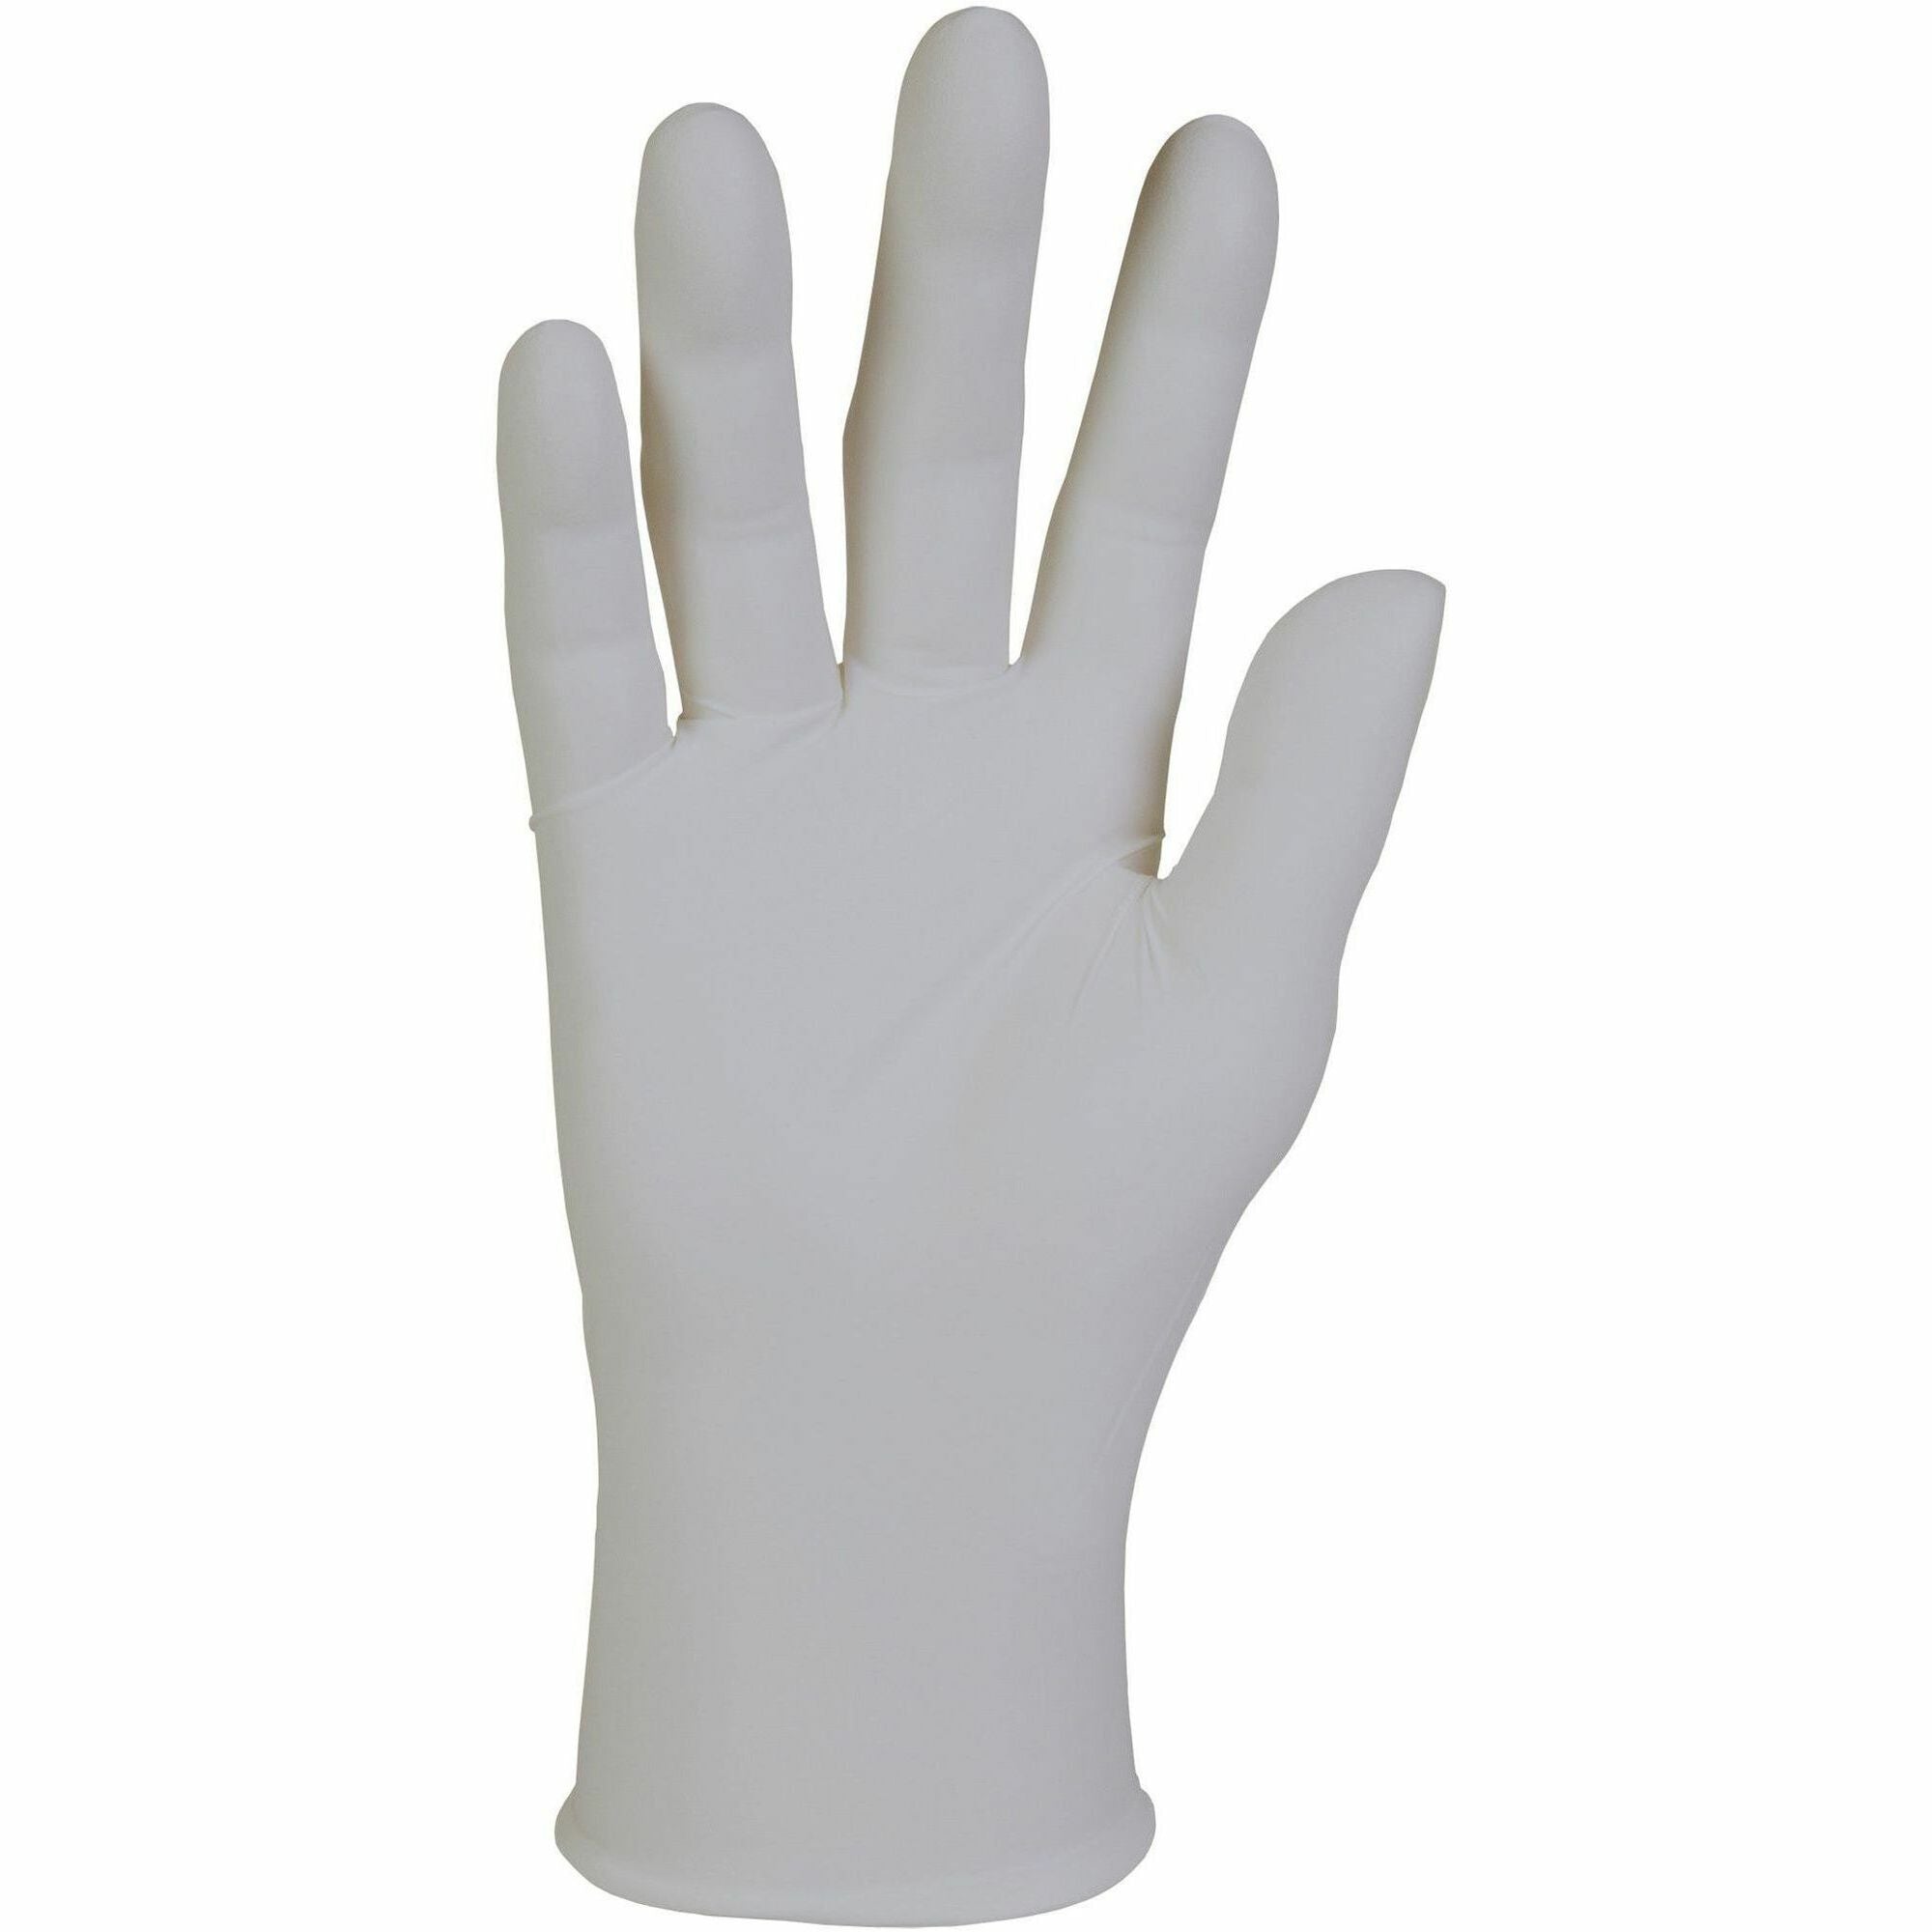 kimberly-clark-professional-sterling-nitrile-exam-gloves_kcc50707ct - 1